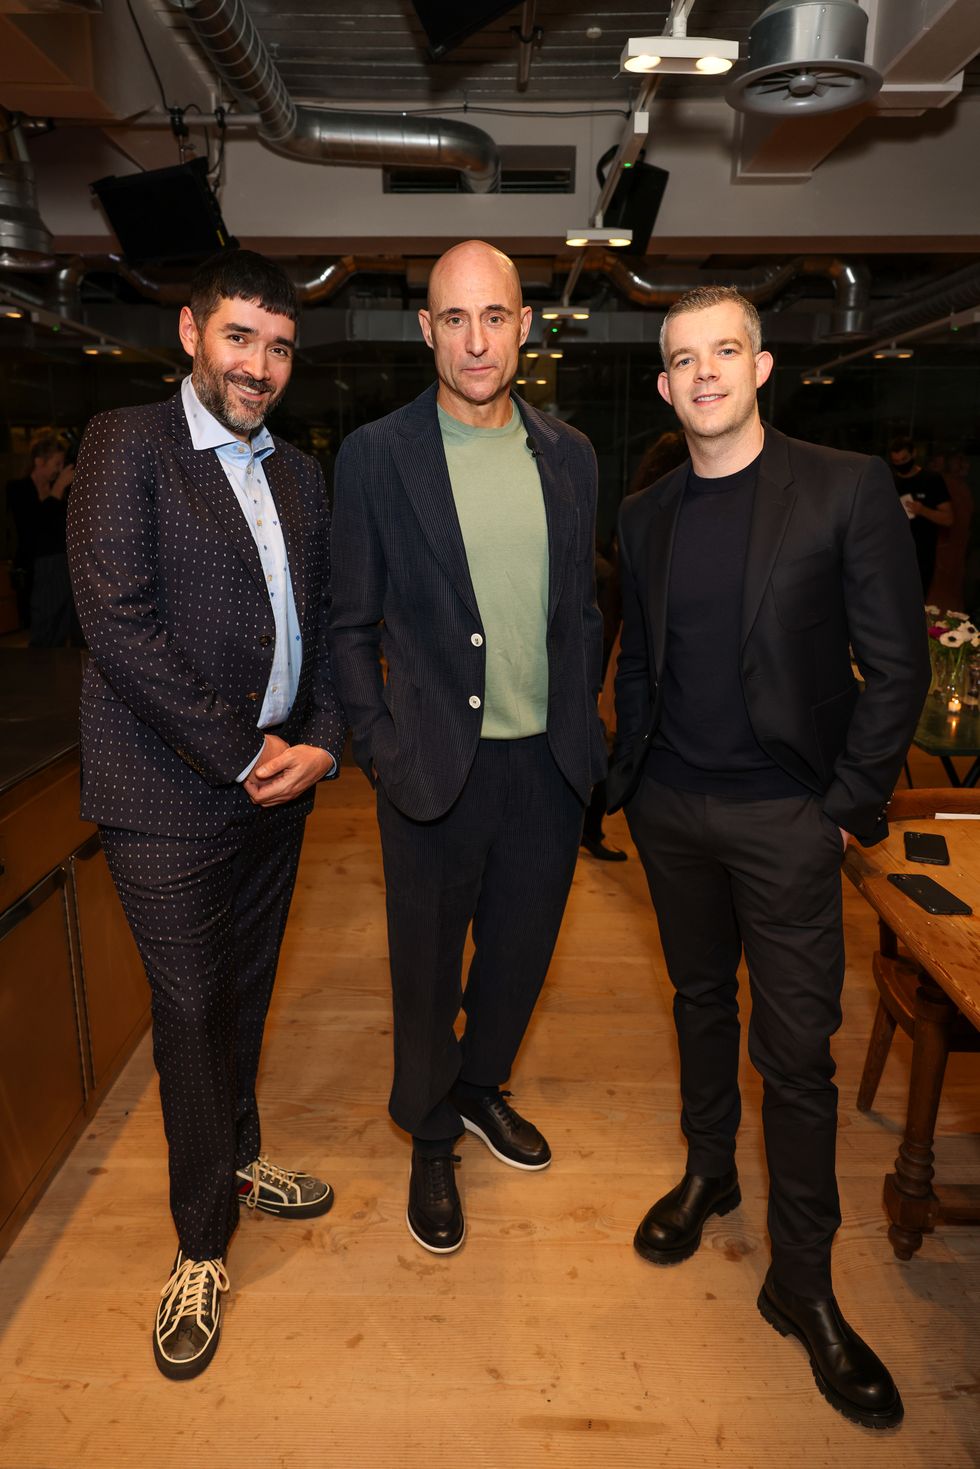 london, england   december 06 robert diament, mark strong and russell tovey at the platinum card from american express x esquire dining event, hosted by actor mark strong and head chef of ikoyi, jeremy chan, 180 house on monday december 6, 2021 in london, englandpic credit dave benett